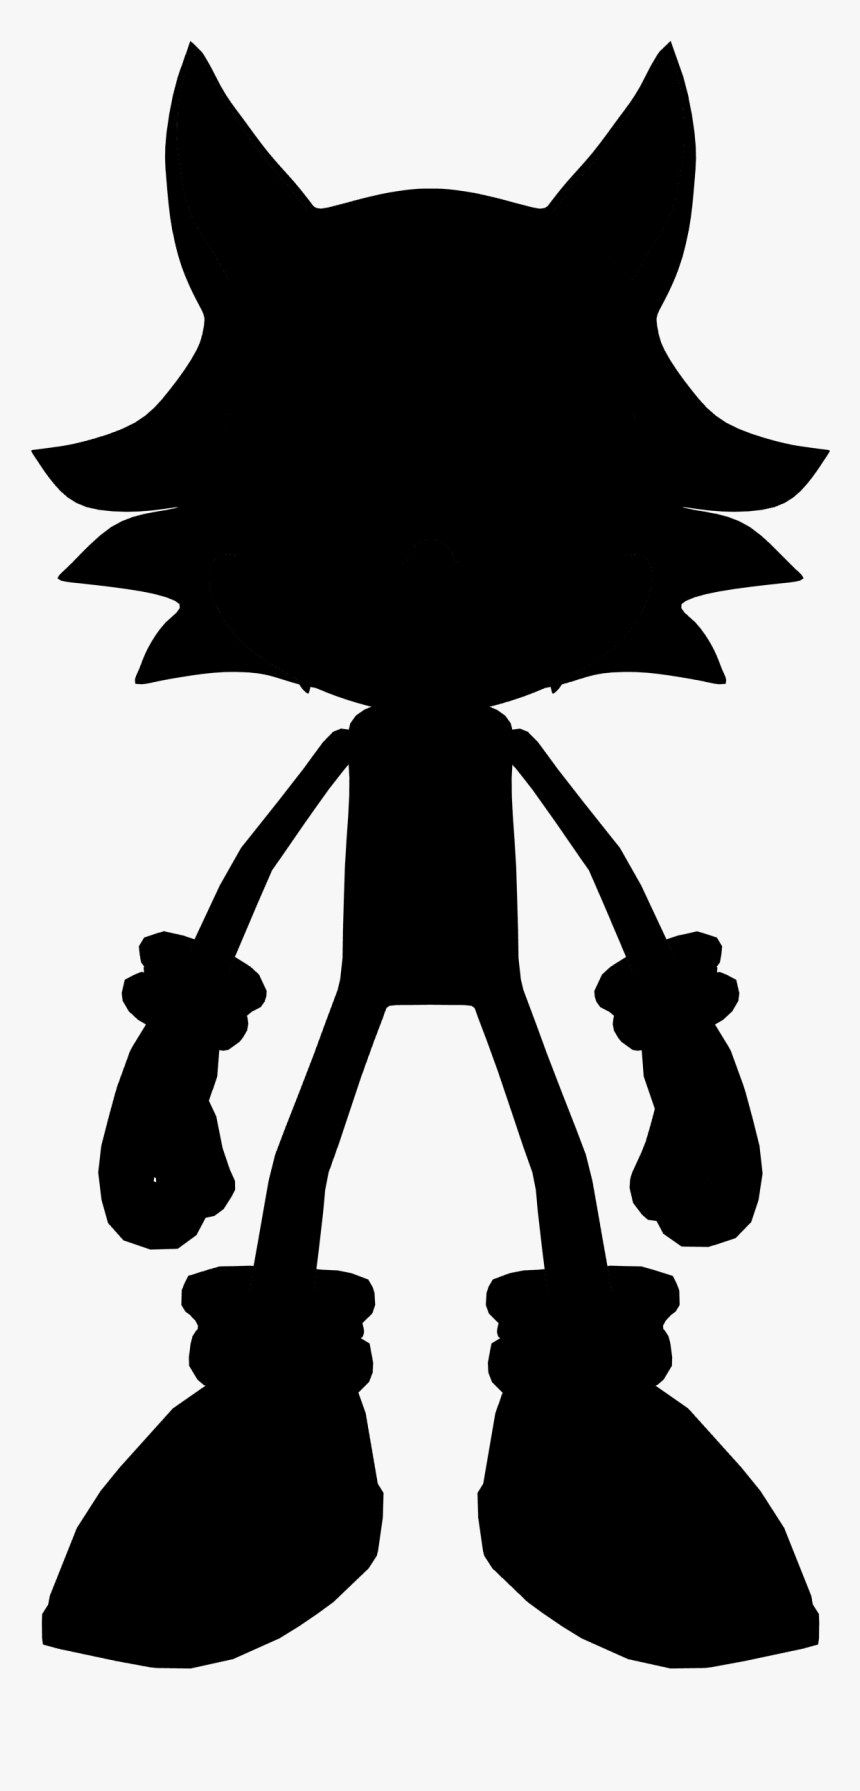 Sonic Forces Third Playable Character By Detexki99 - Illustration, HD Png Download, Free Download